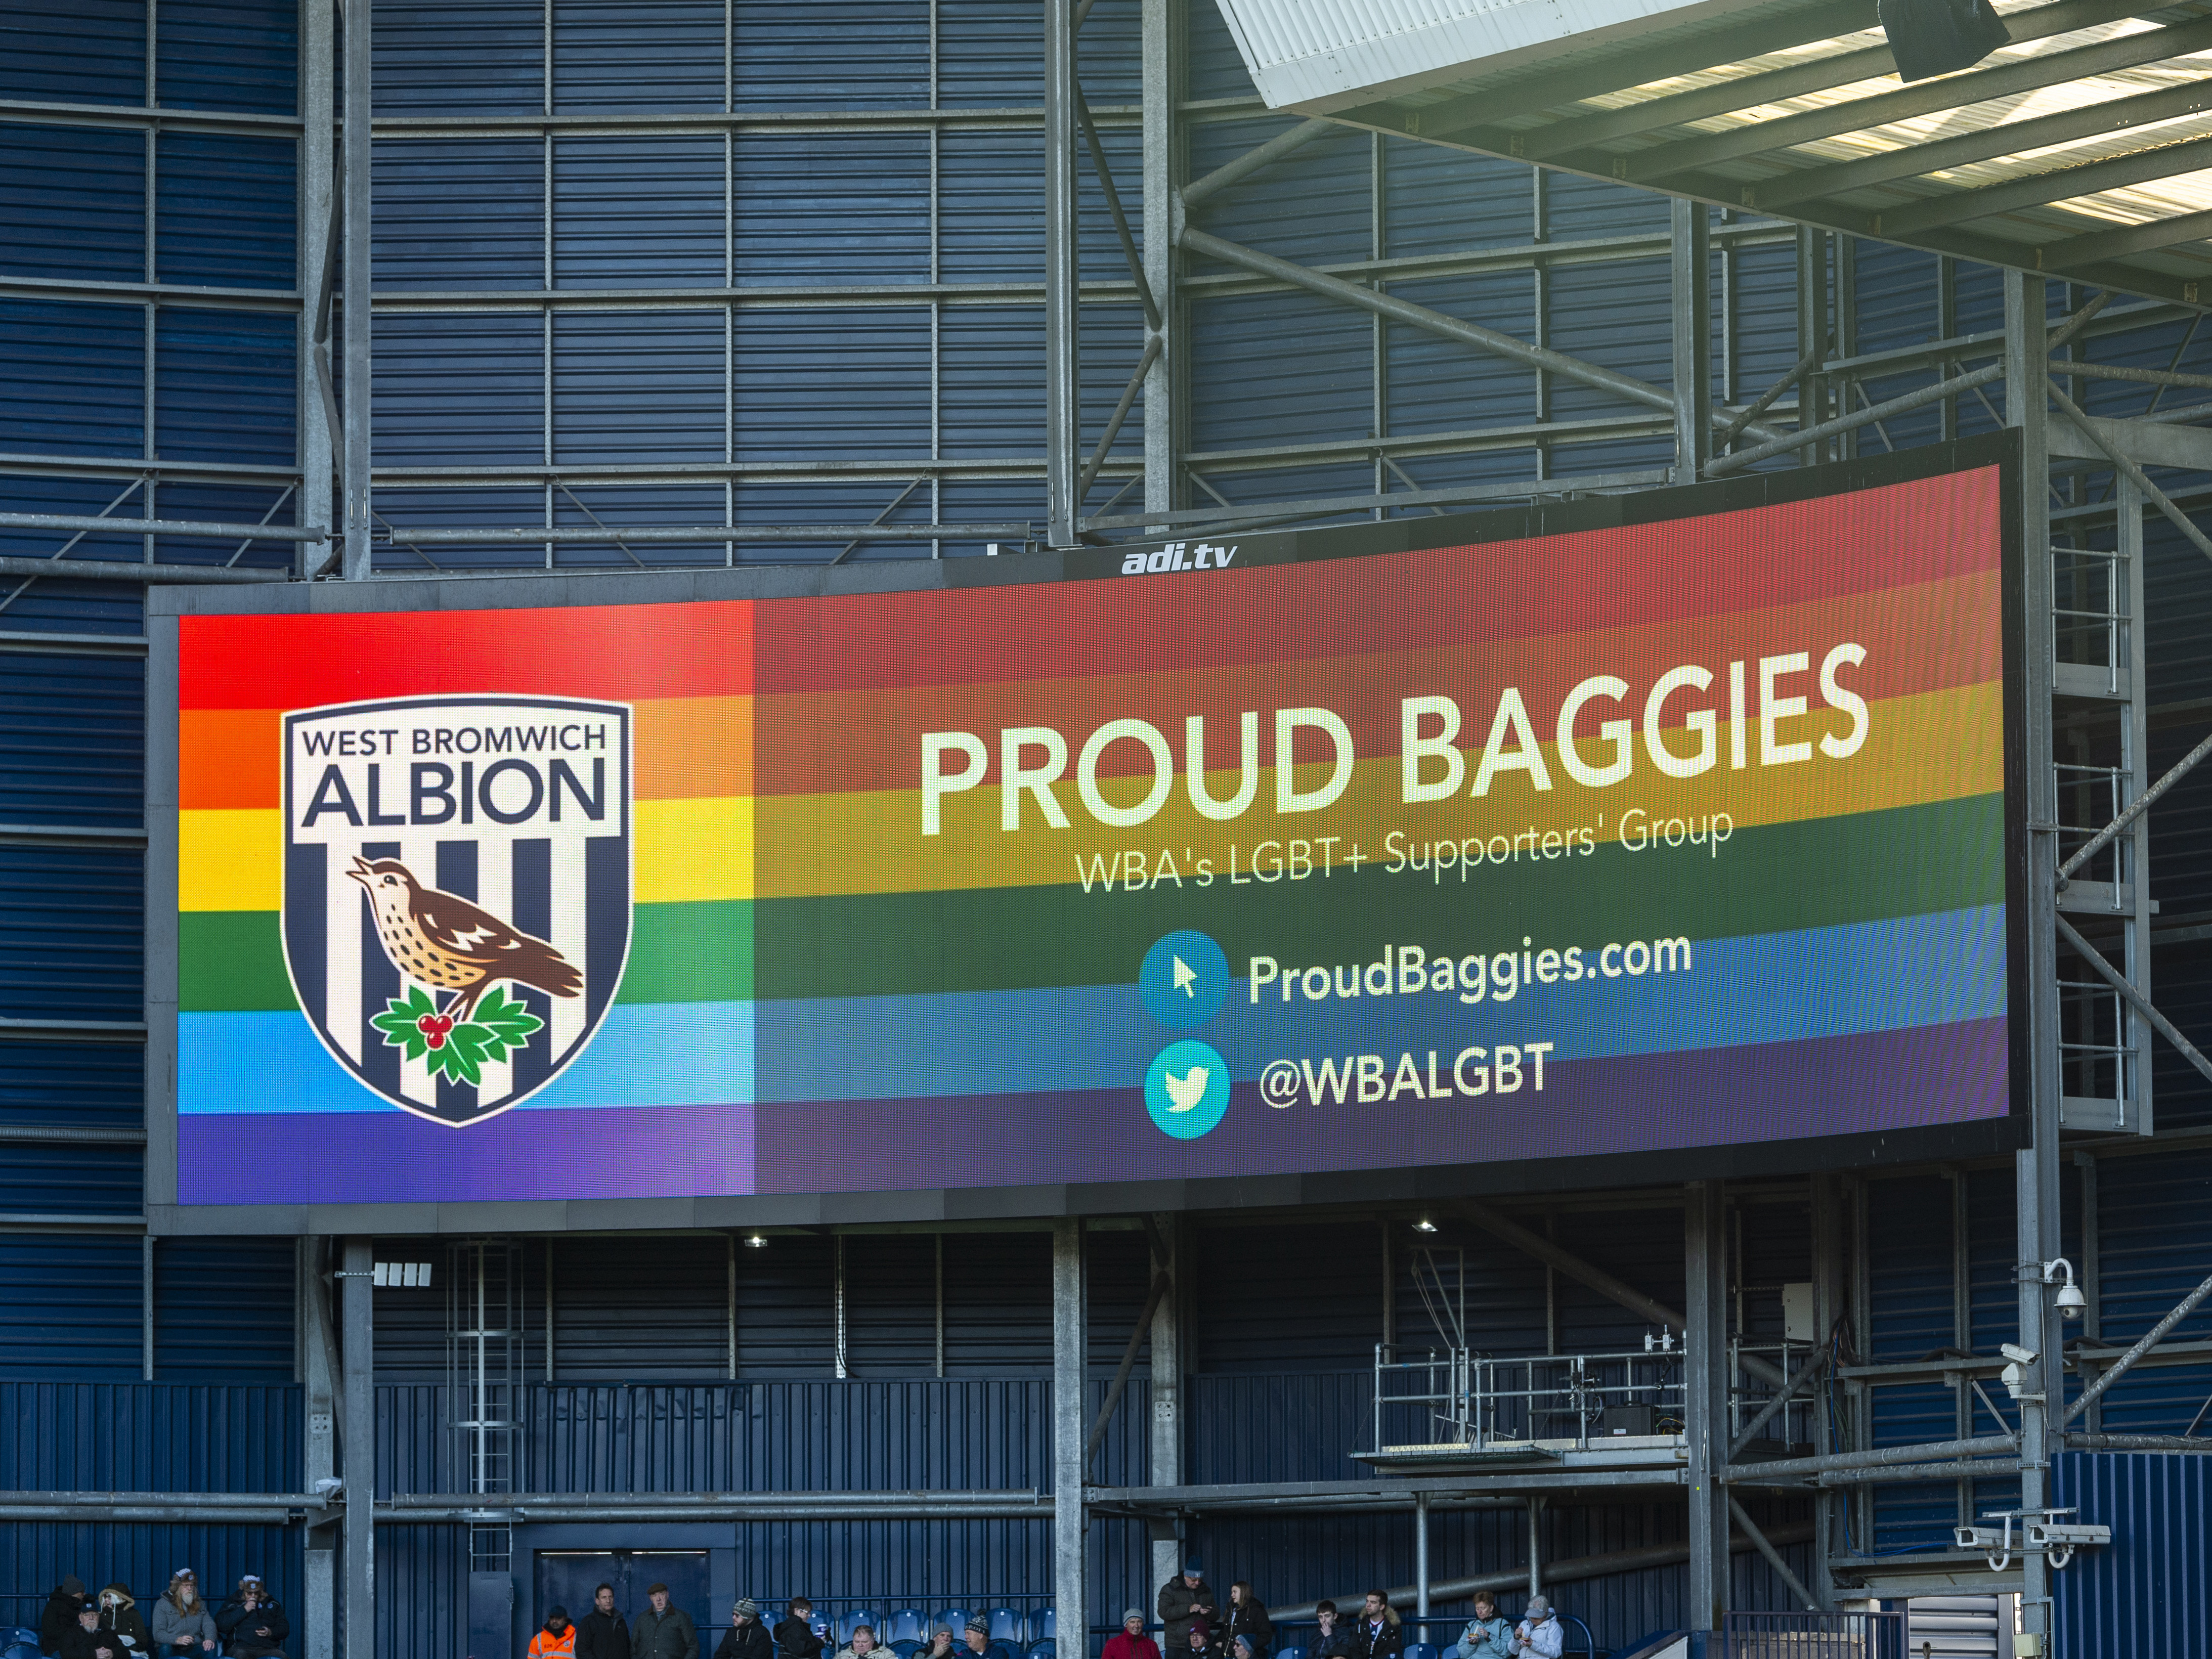 Albion will proudly support Stonewall’s Rainbow Laces campaign when Nottingham Forest visit The Hawthorns on Friday